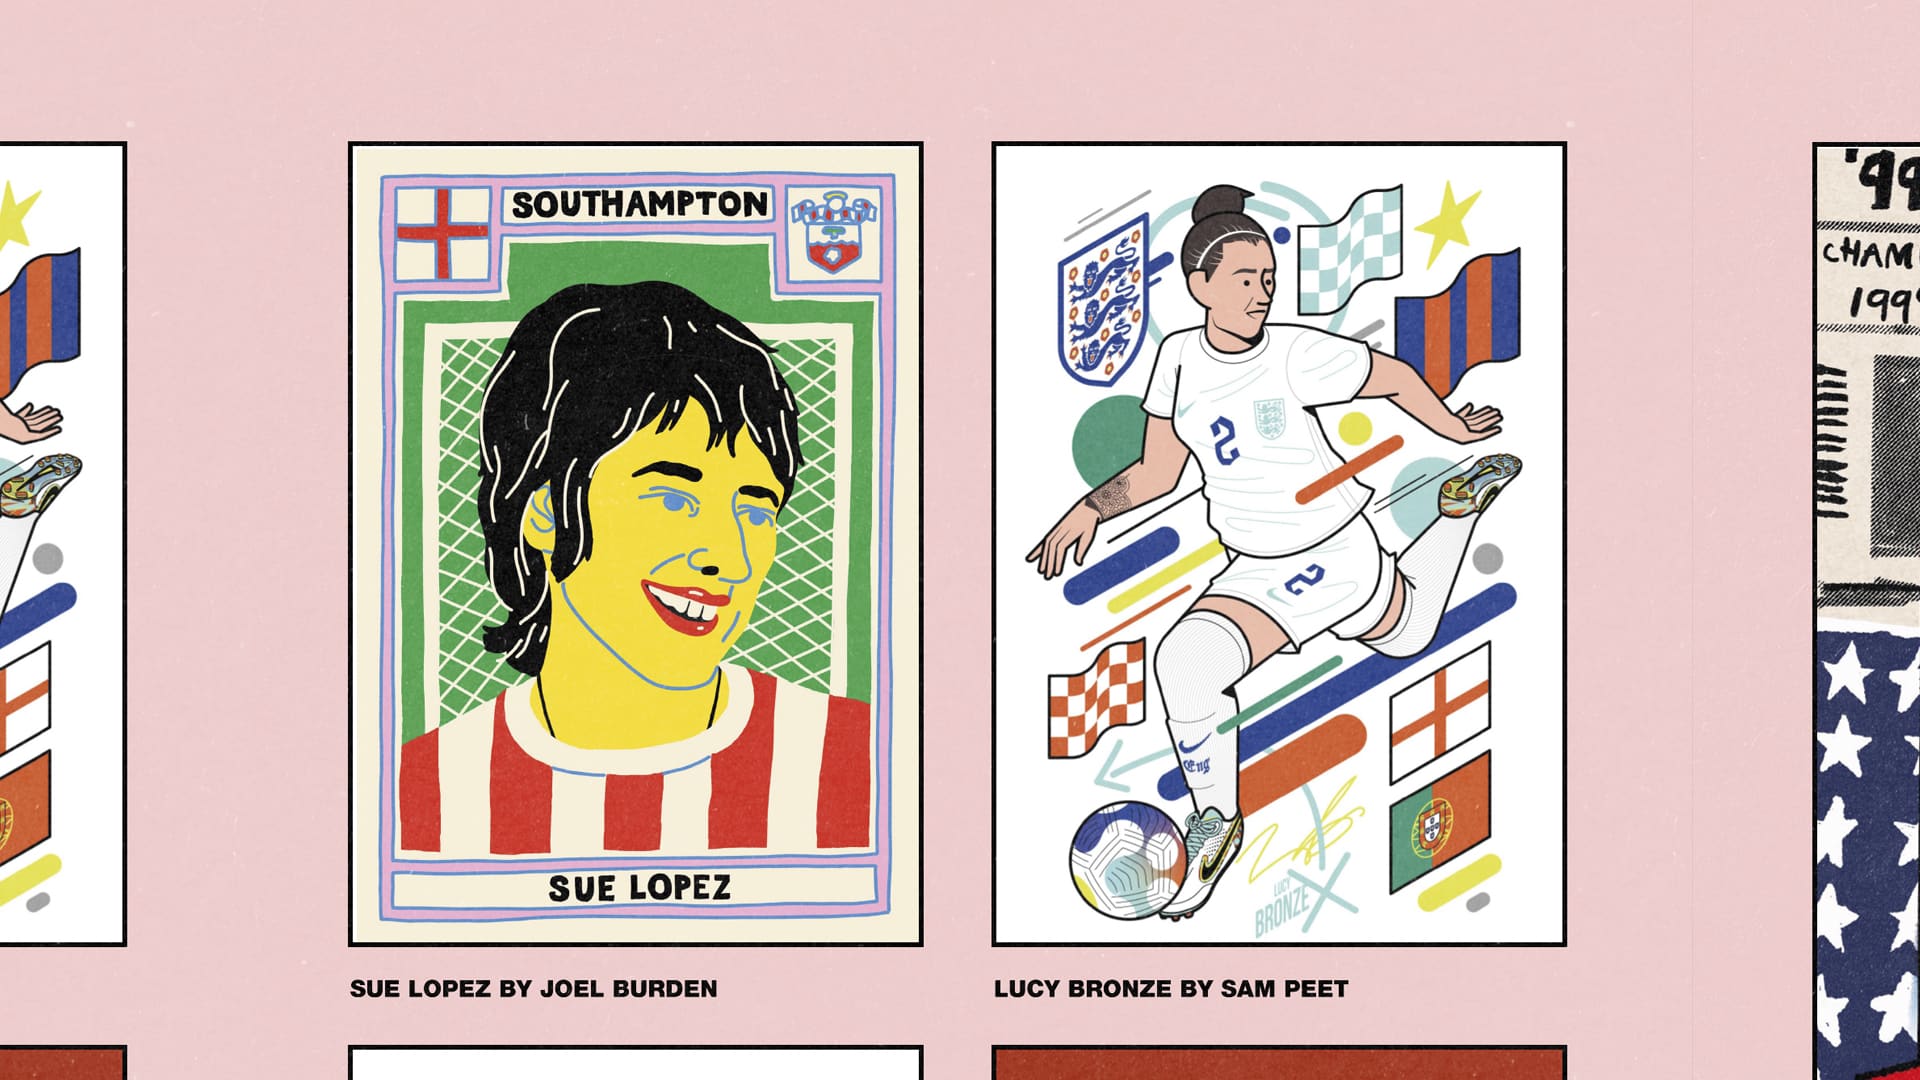 Illustrations from the Forward Play exhibition featuring Sue Lopez by Joel Burden and Lucy Bronze by Sam Peet